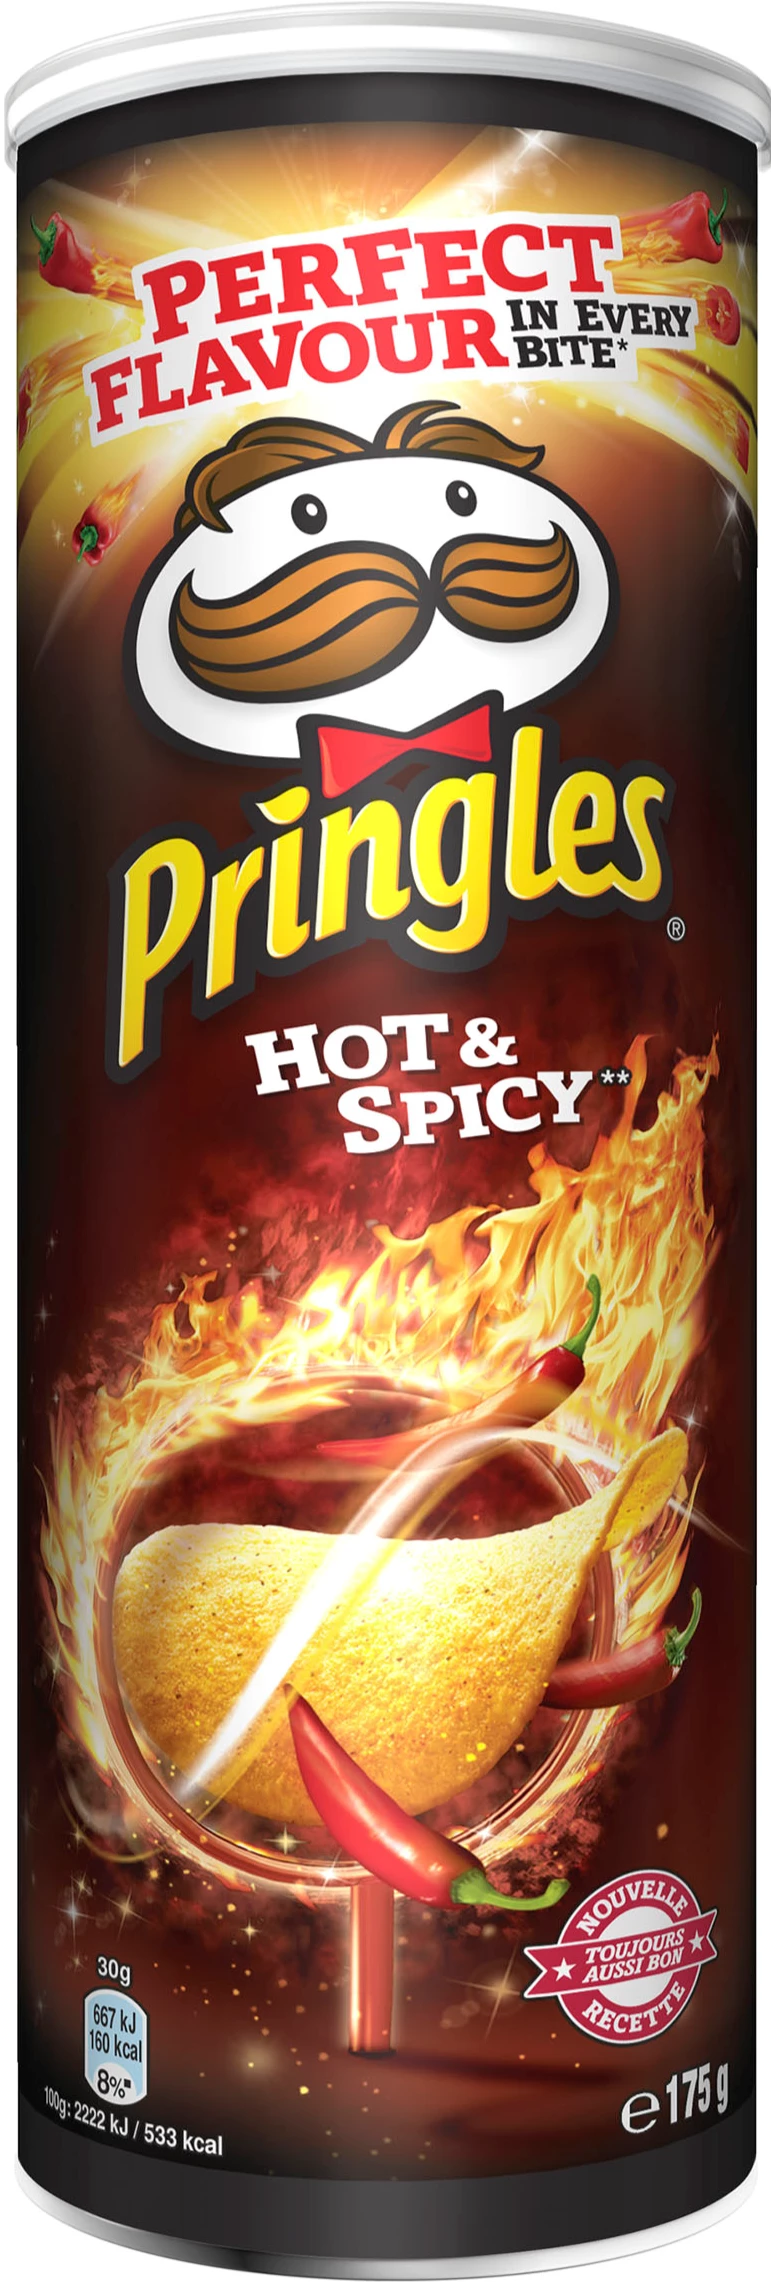 Chips Hot & Spicy Boite 175g - PRINGLES